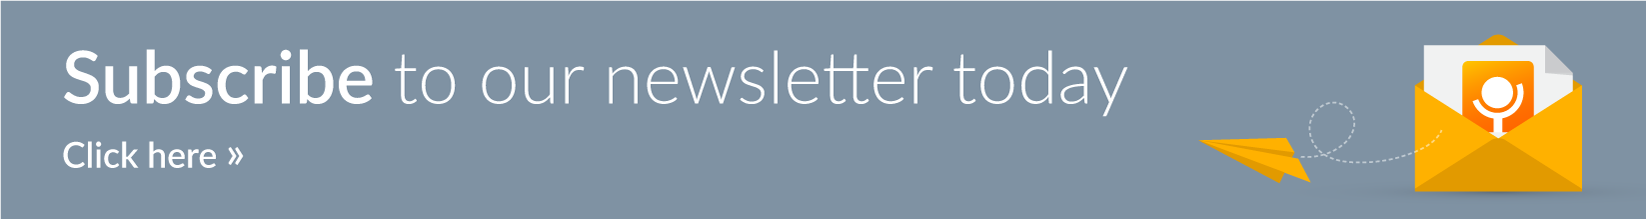 Newsletter-subscribe-banner-03.png